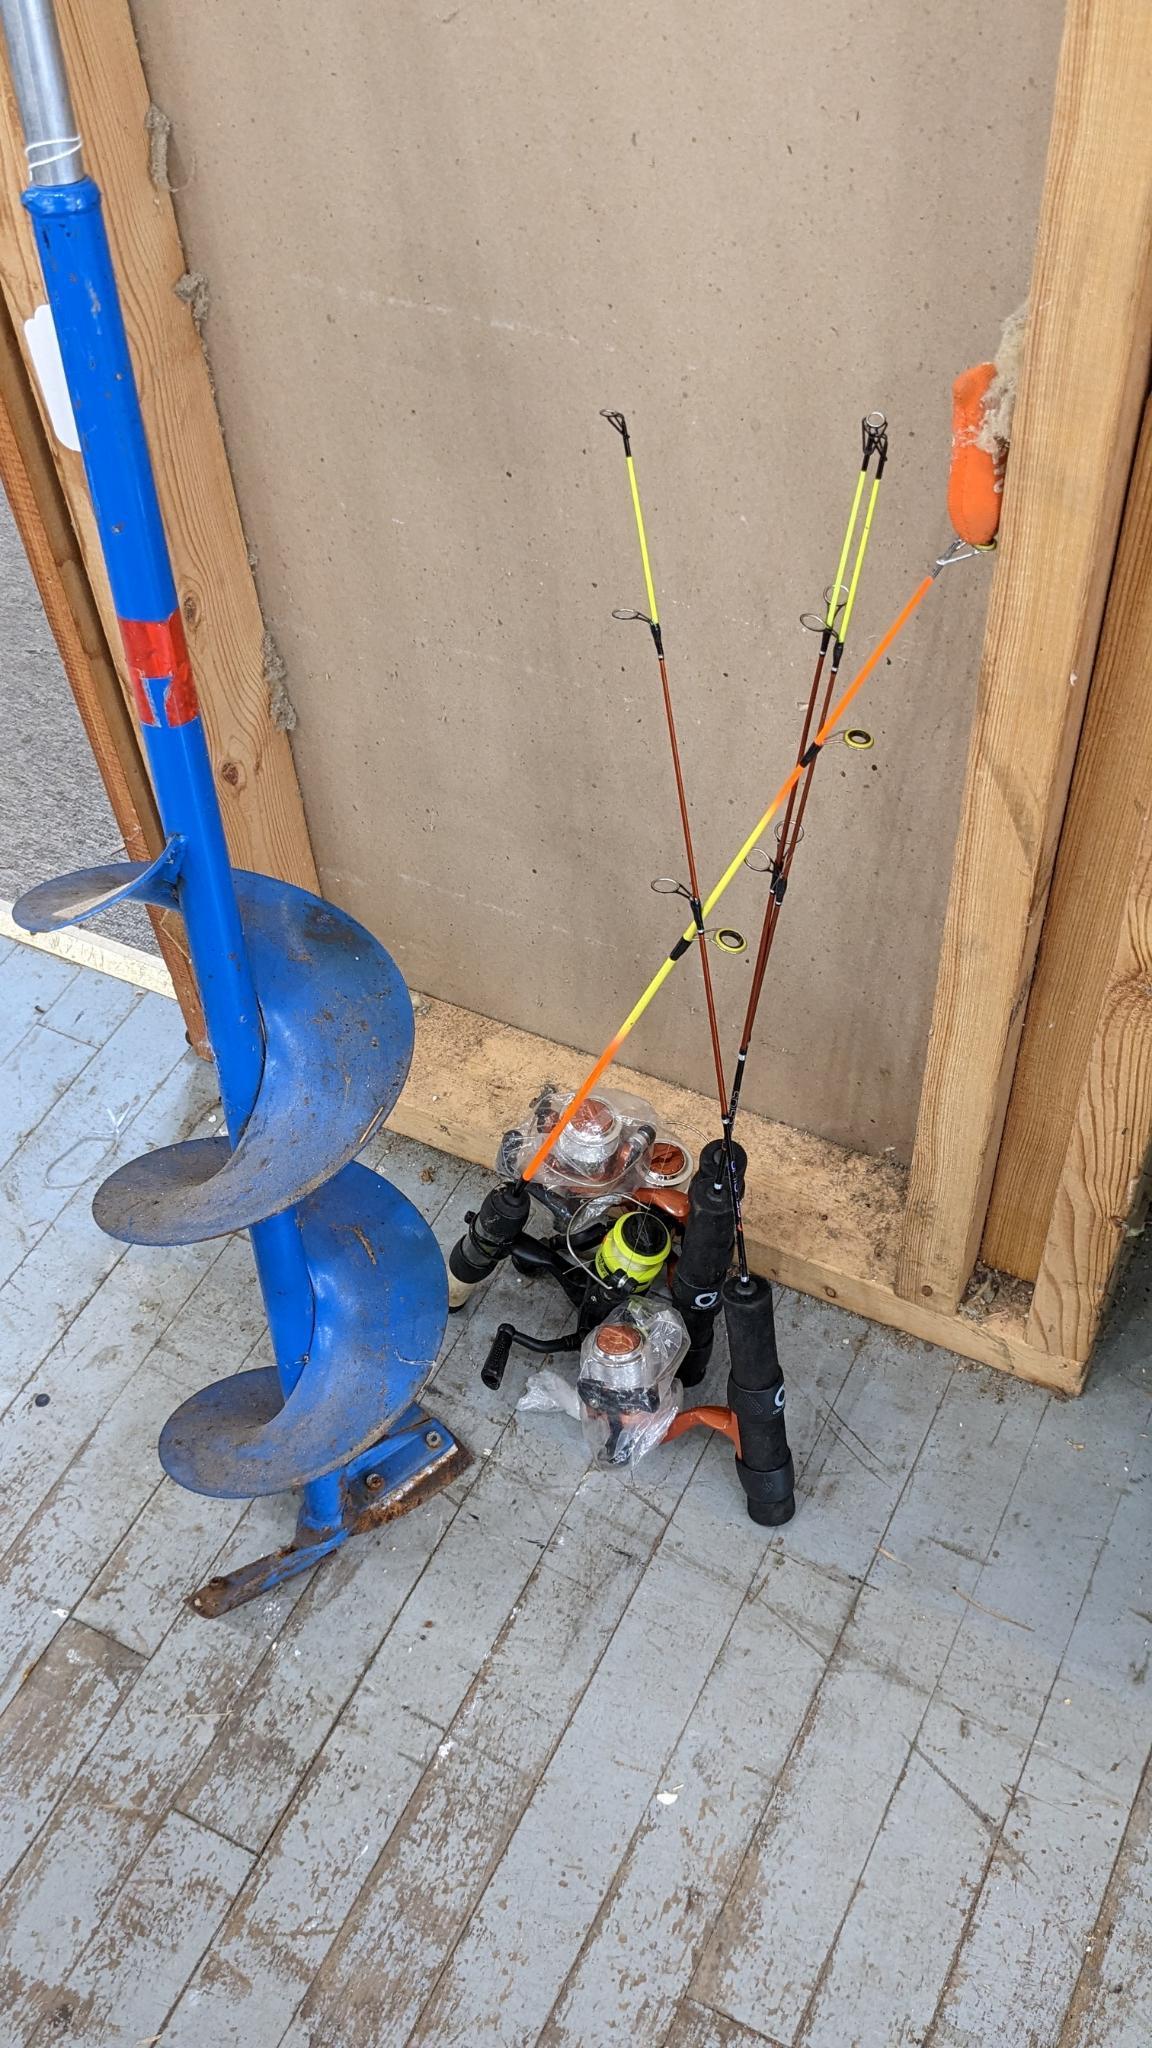 Four ice fishing poles and a 7 ice auger ready